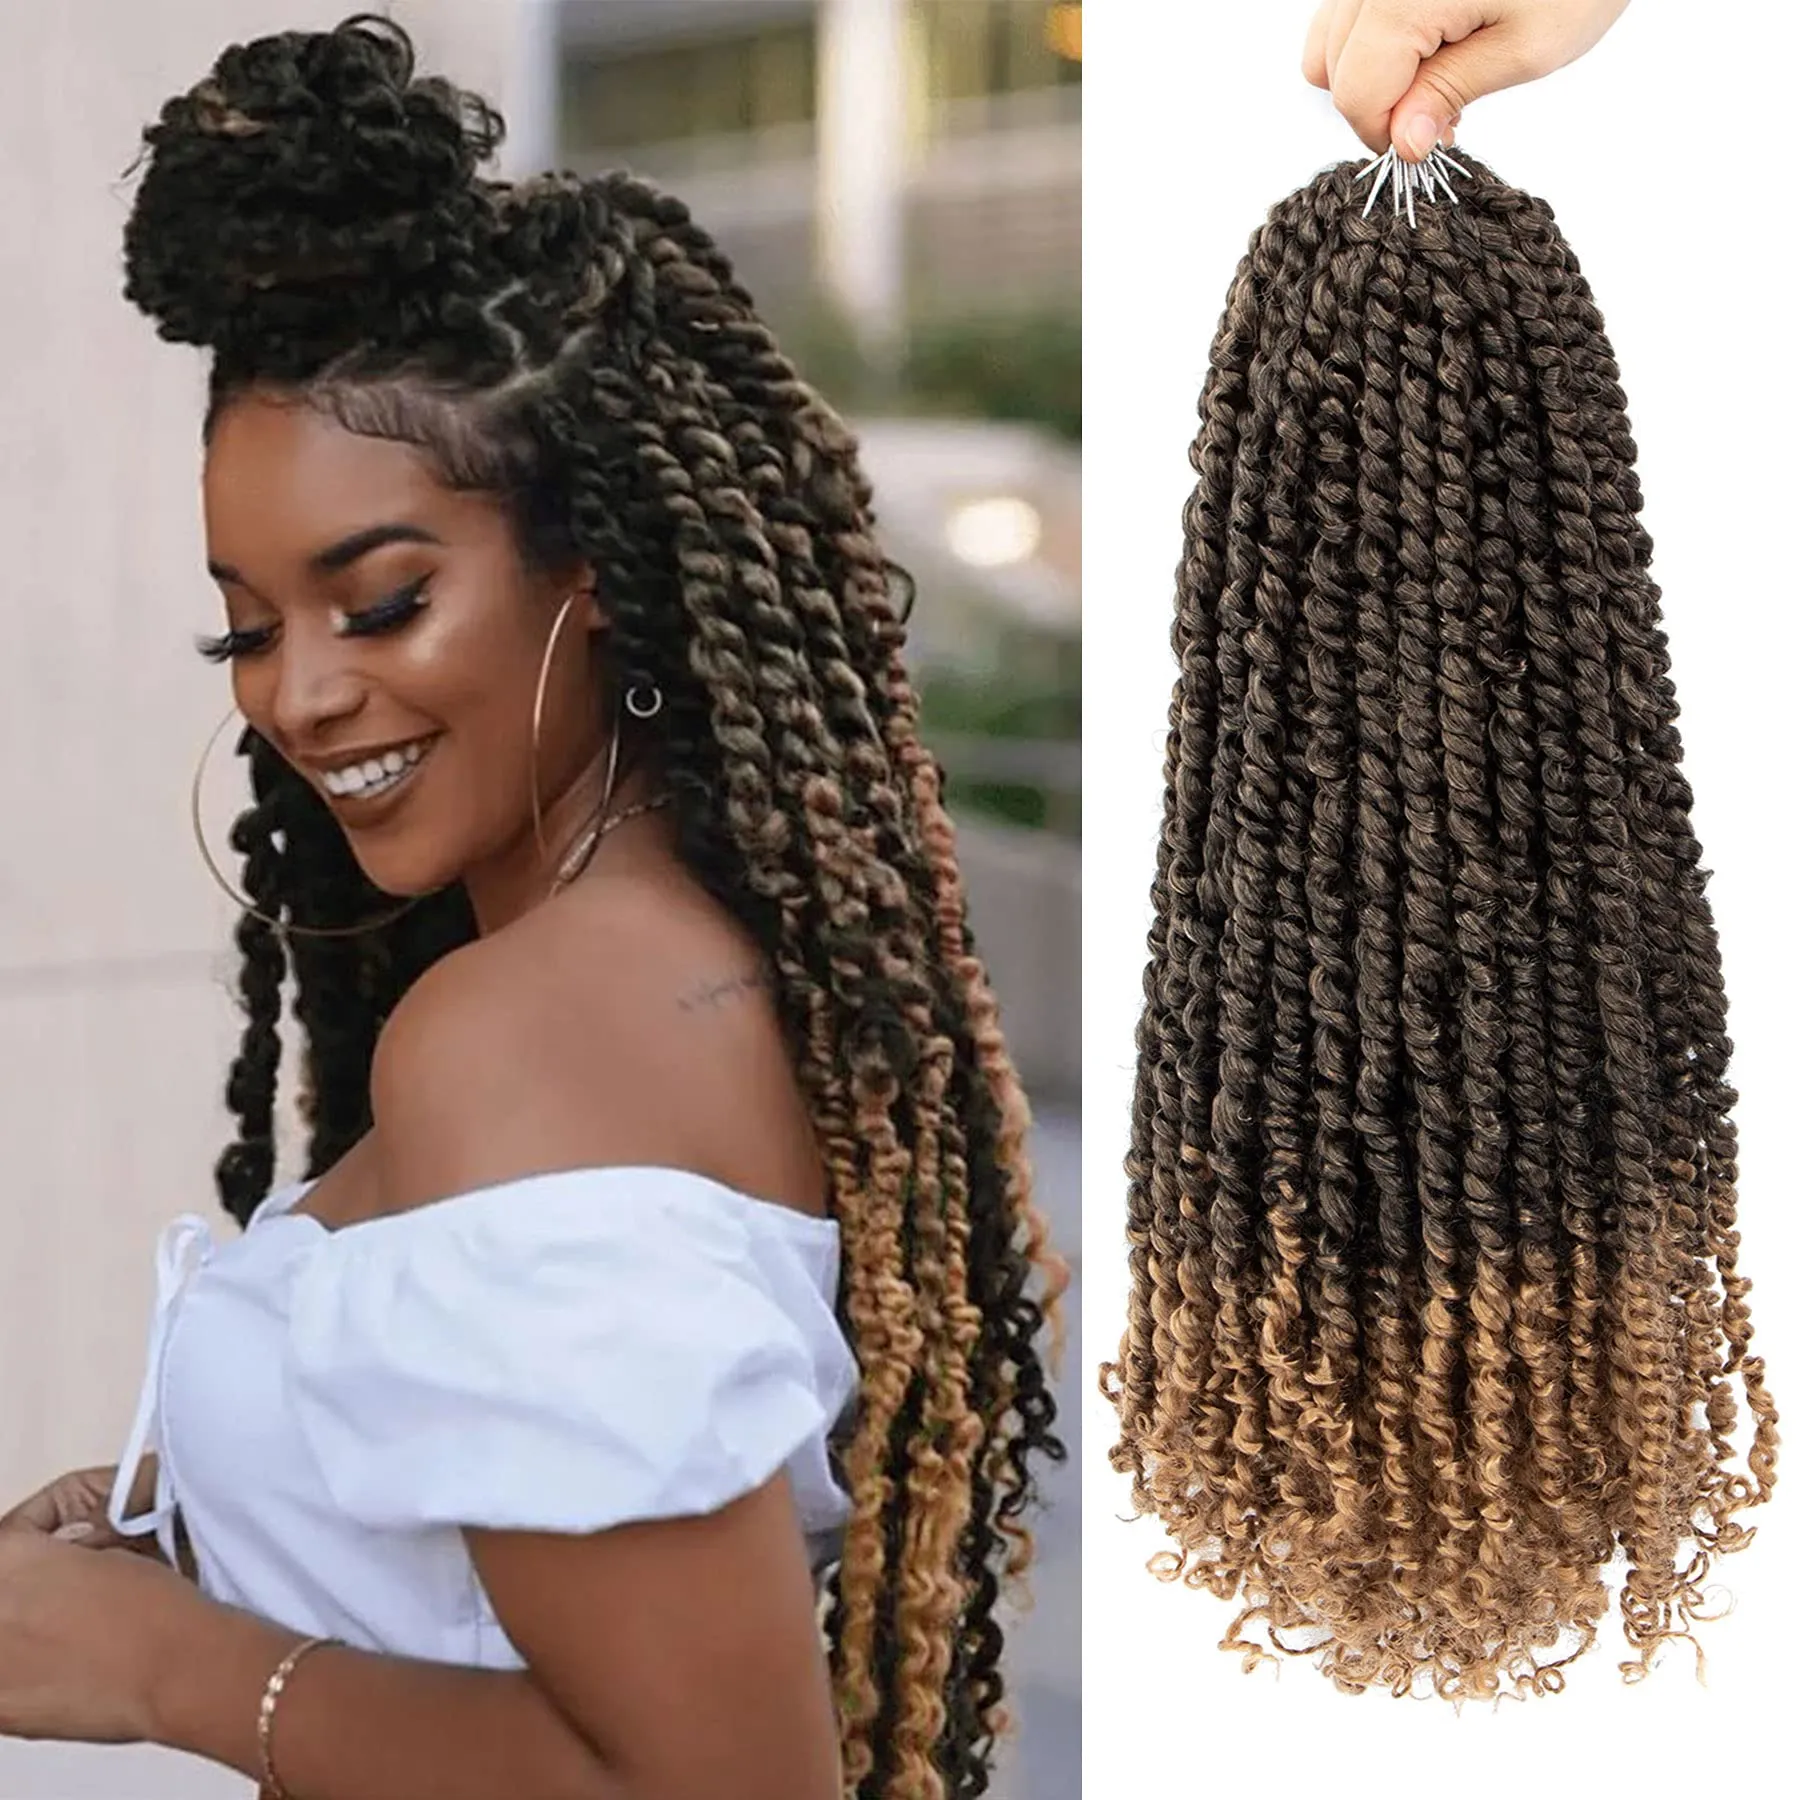 Passion Twist Hair 24 Inch Water Wave Crochet Hair Color 1B Passion Twists Long Bohemian Twisted Crochets Synthetic Braiding Hair Extensions LS01